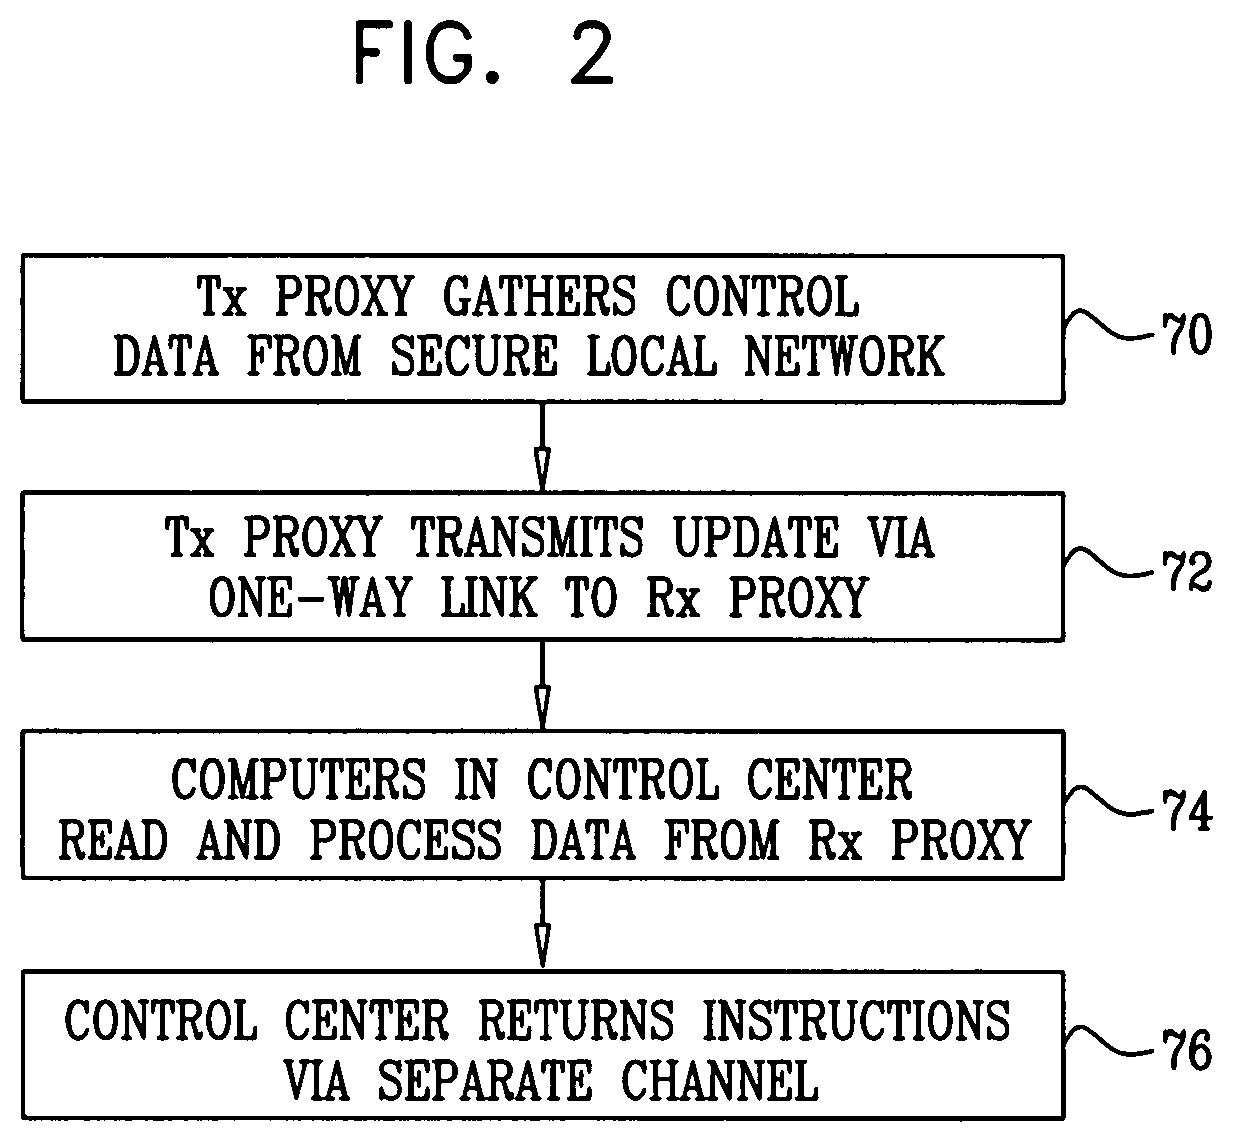 Protection of control networks using a one-way link